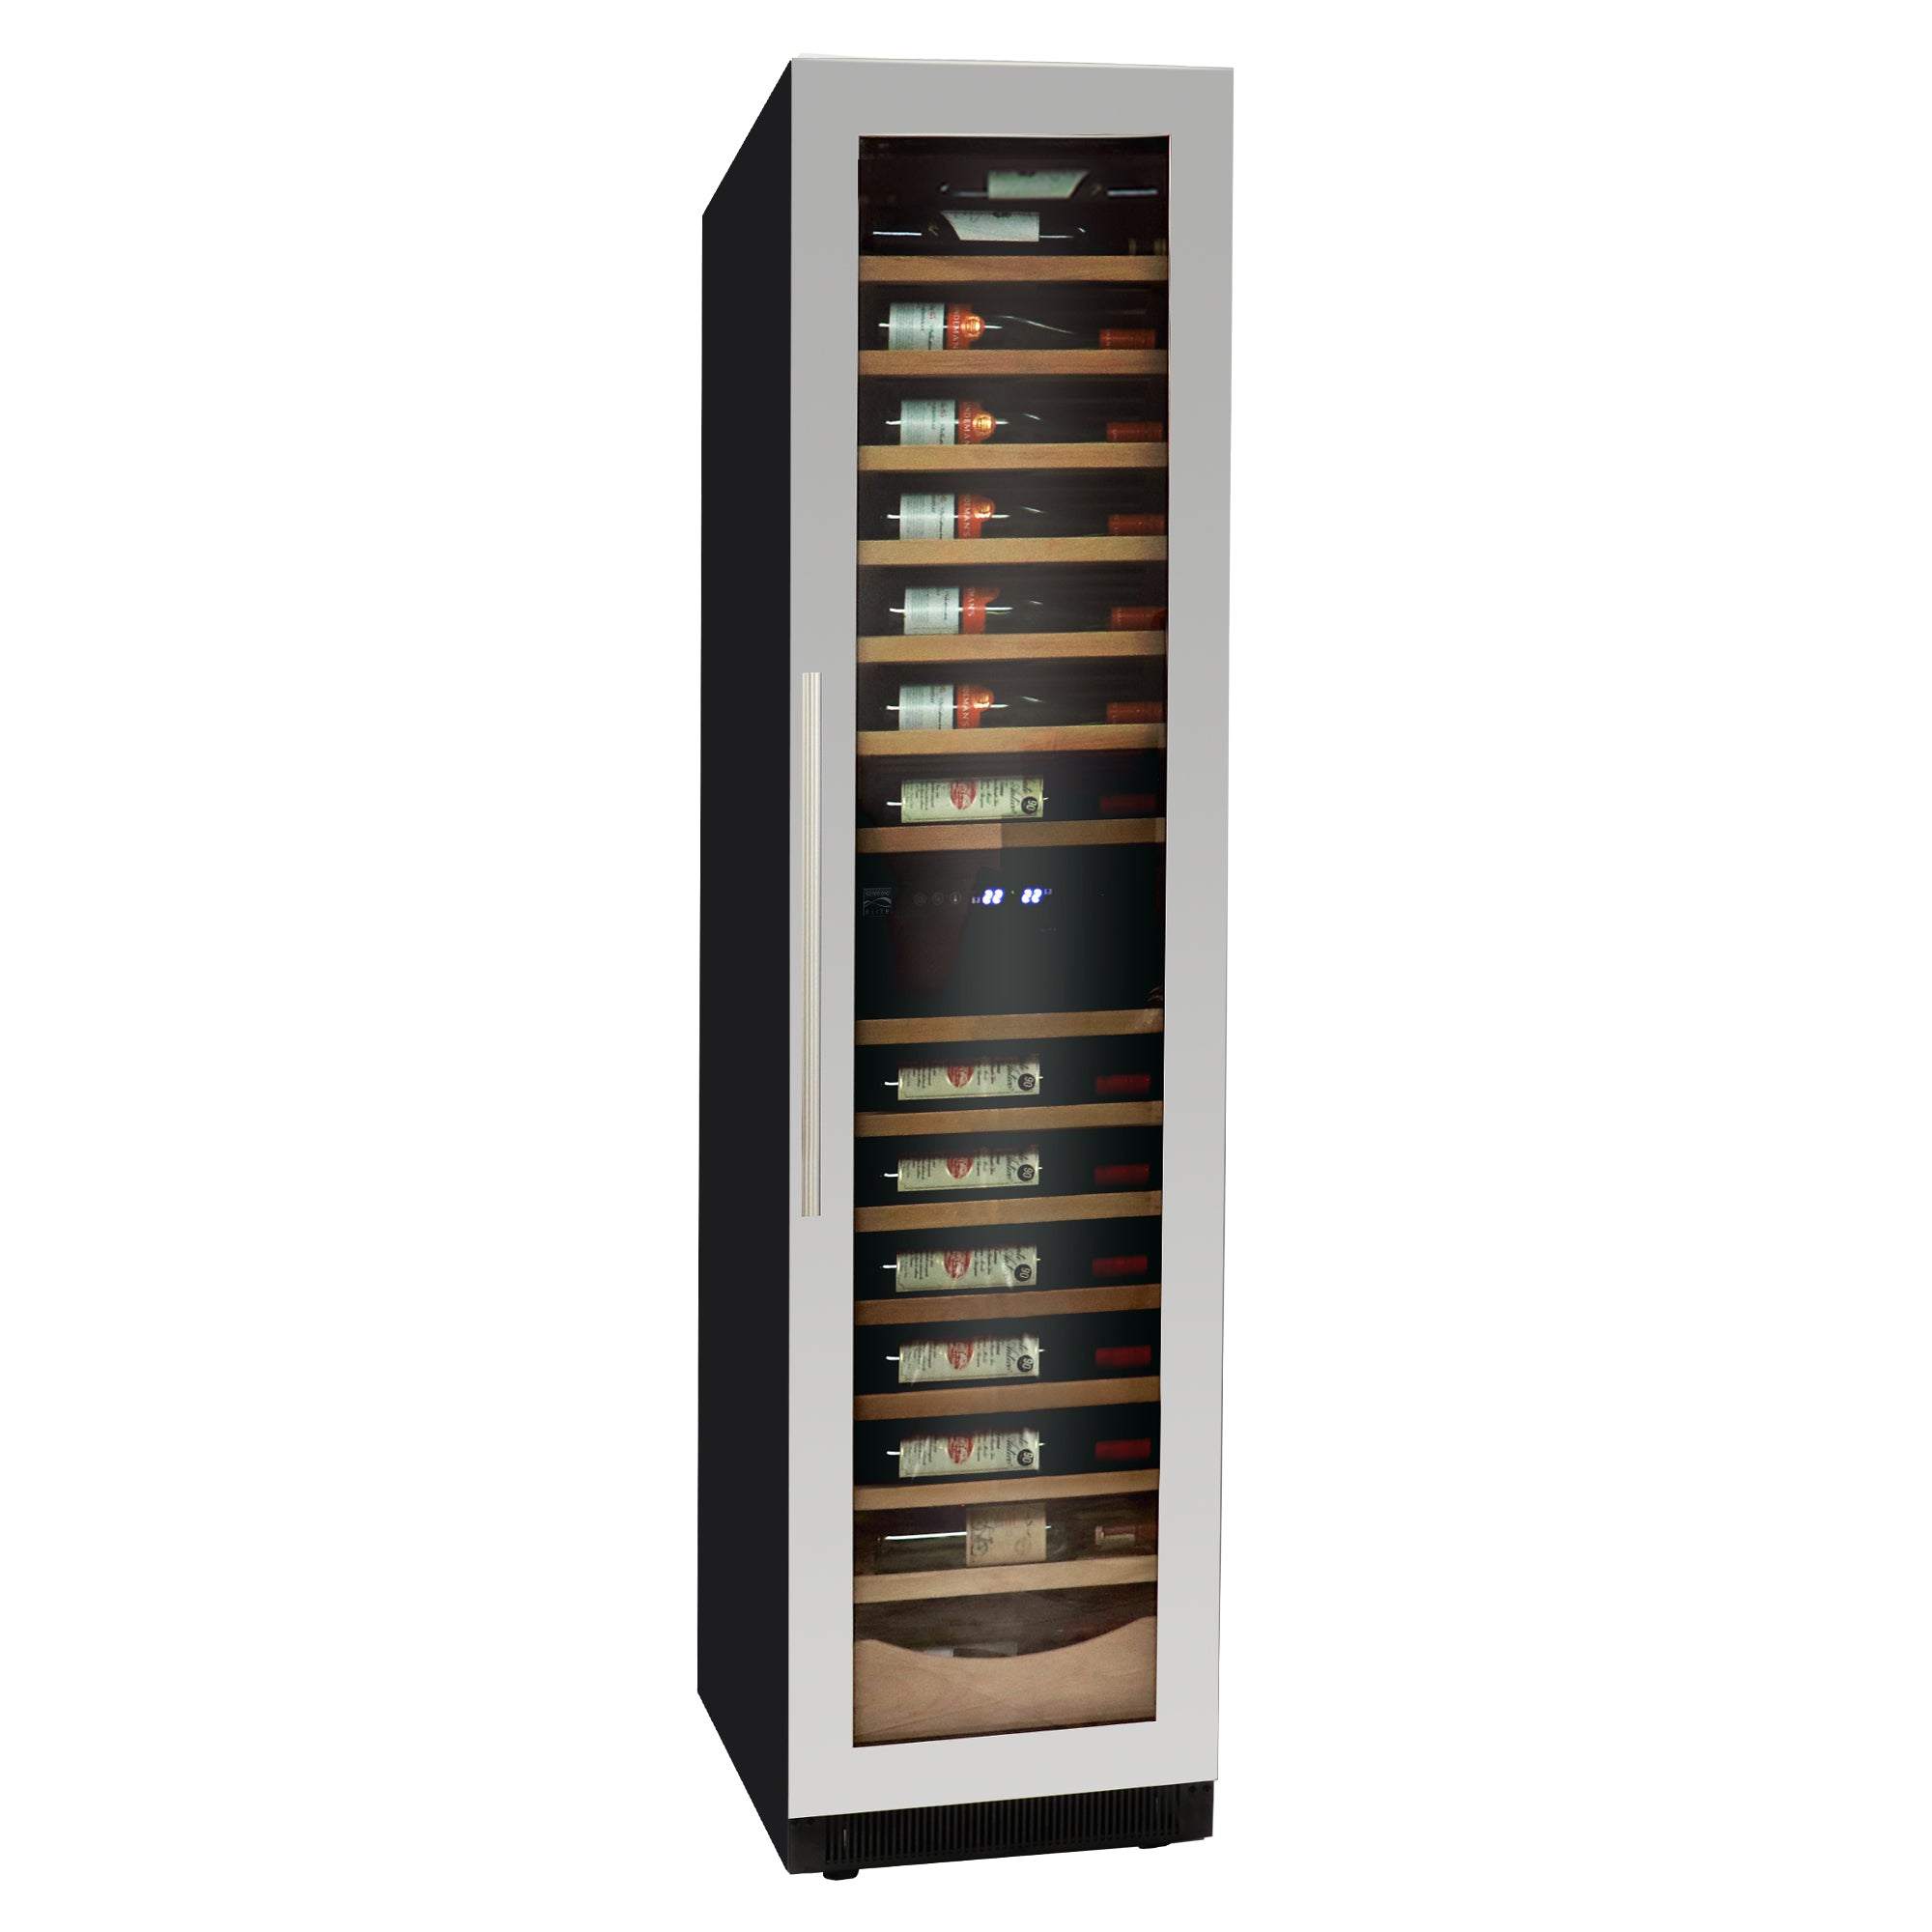 Kenmore Elite 111 bottle 18 inch dual zone compressor wine cooler filled with bottles of wine on a white background